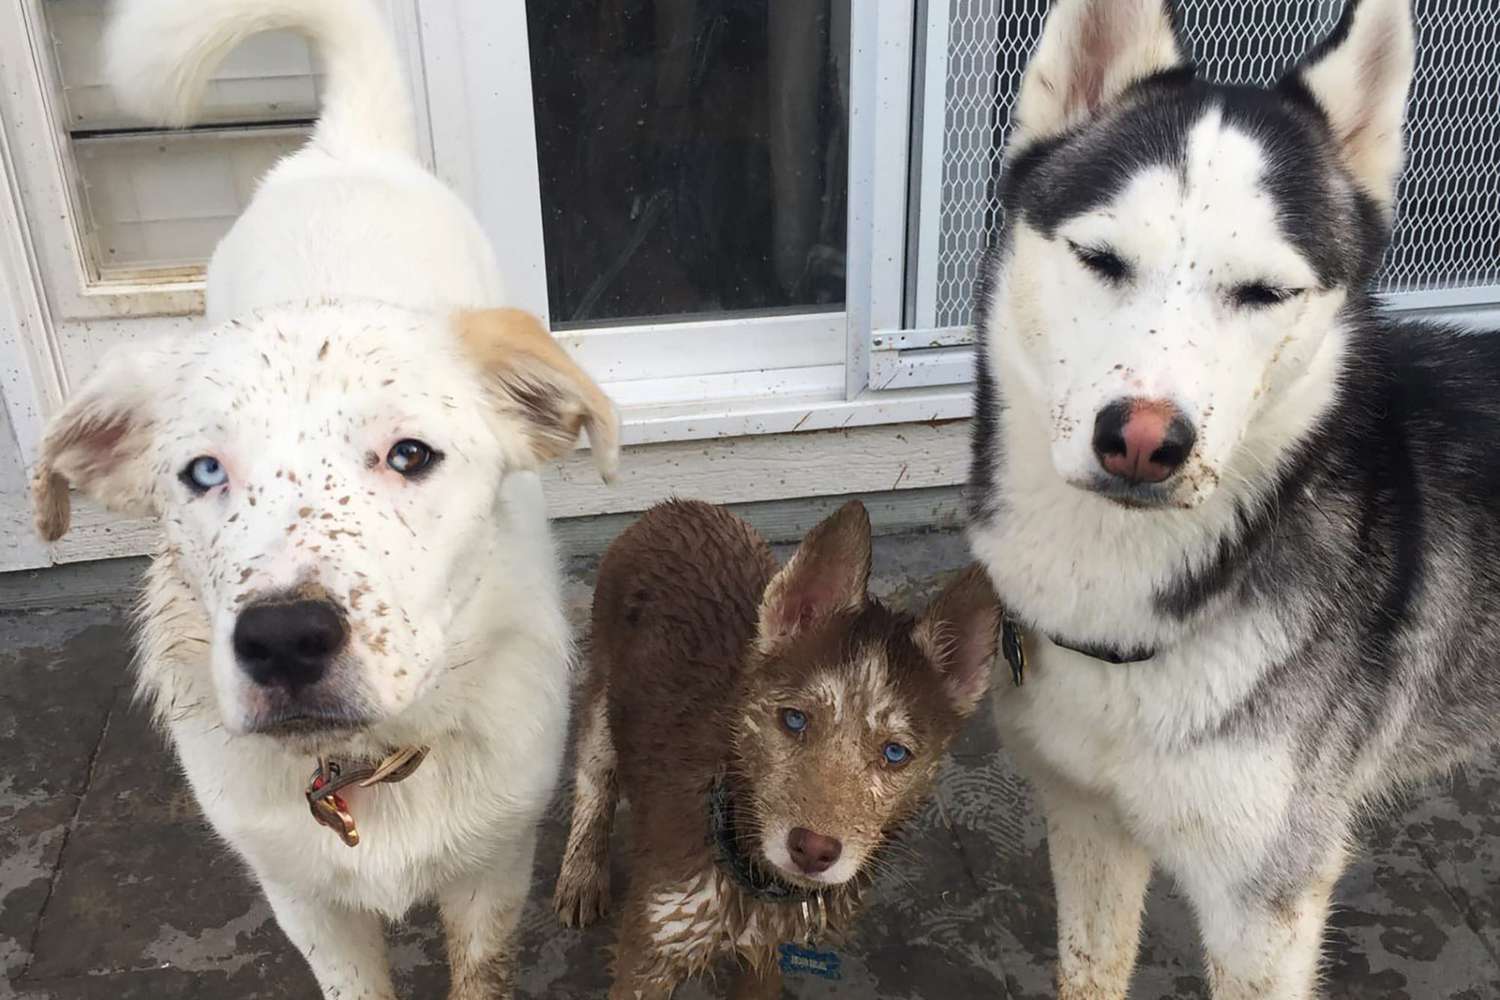 Three dogs stand side by side splattered with mud